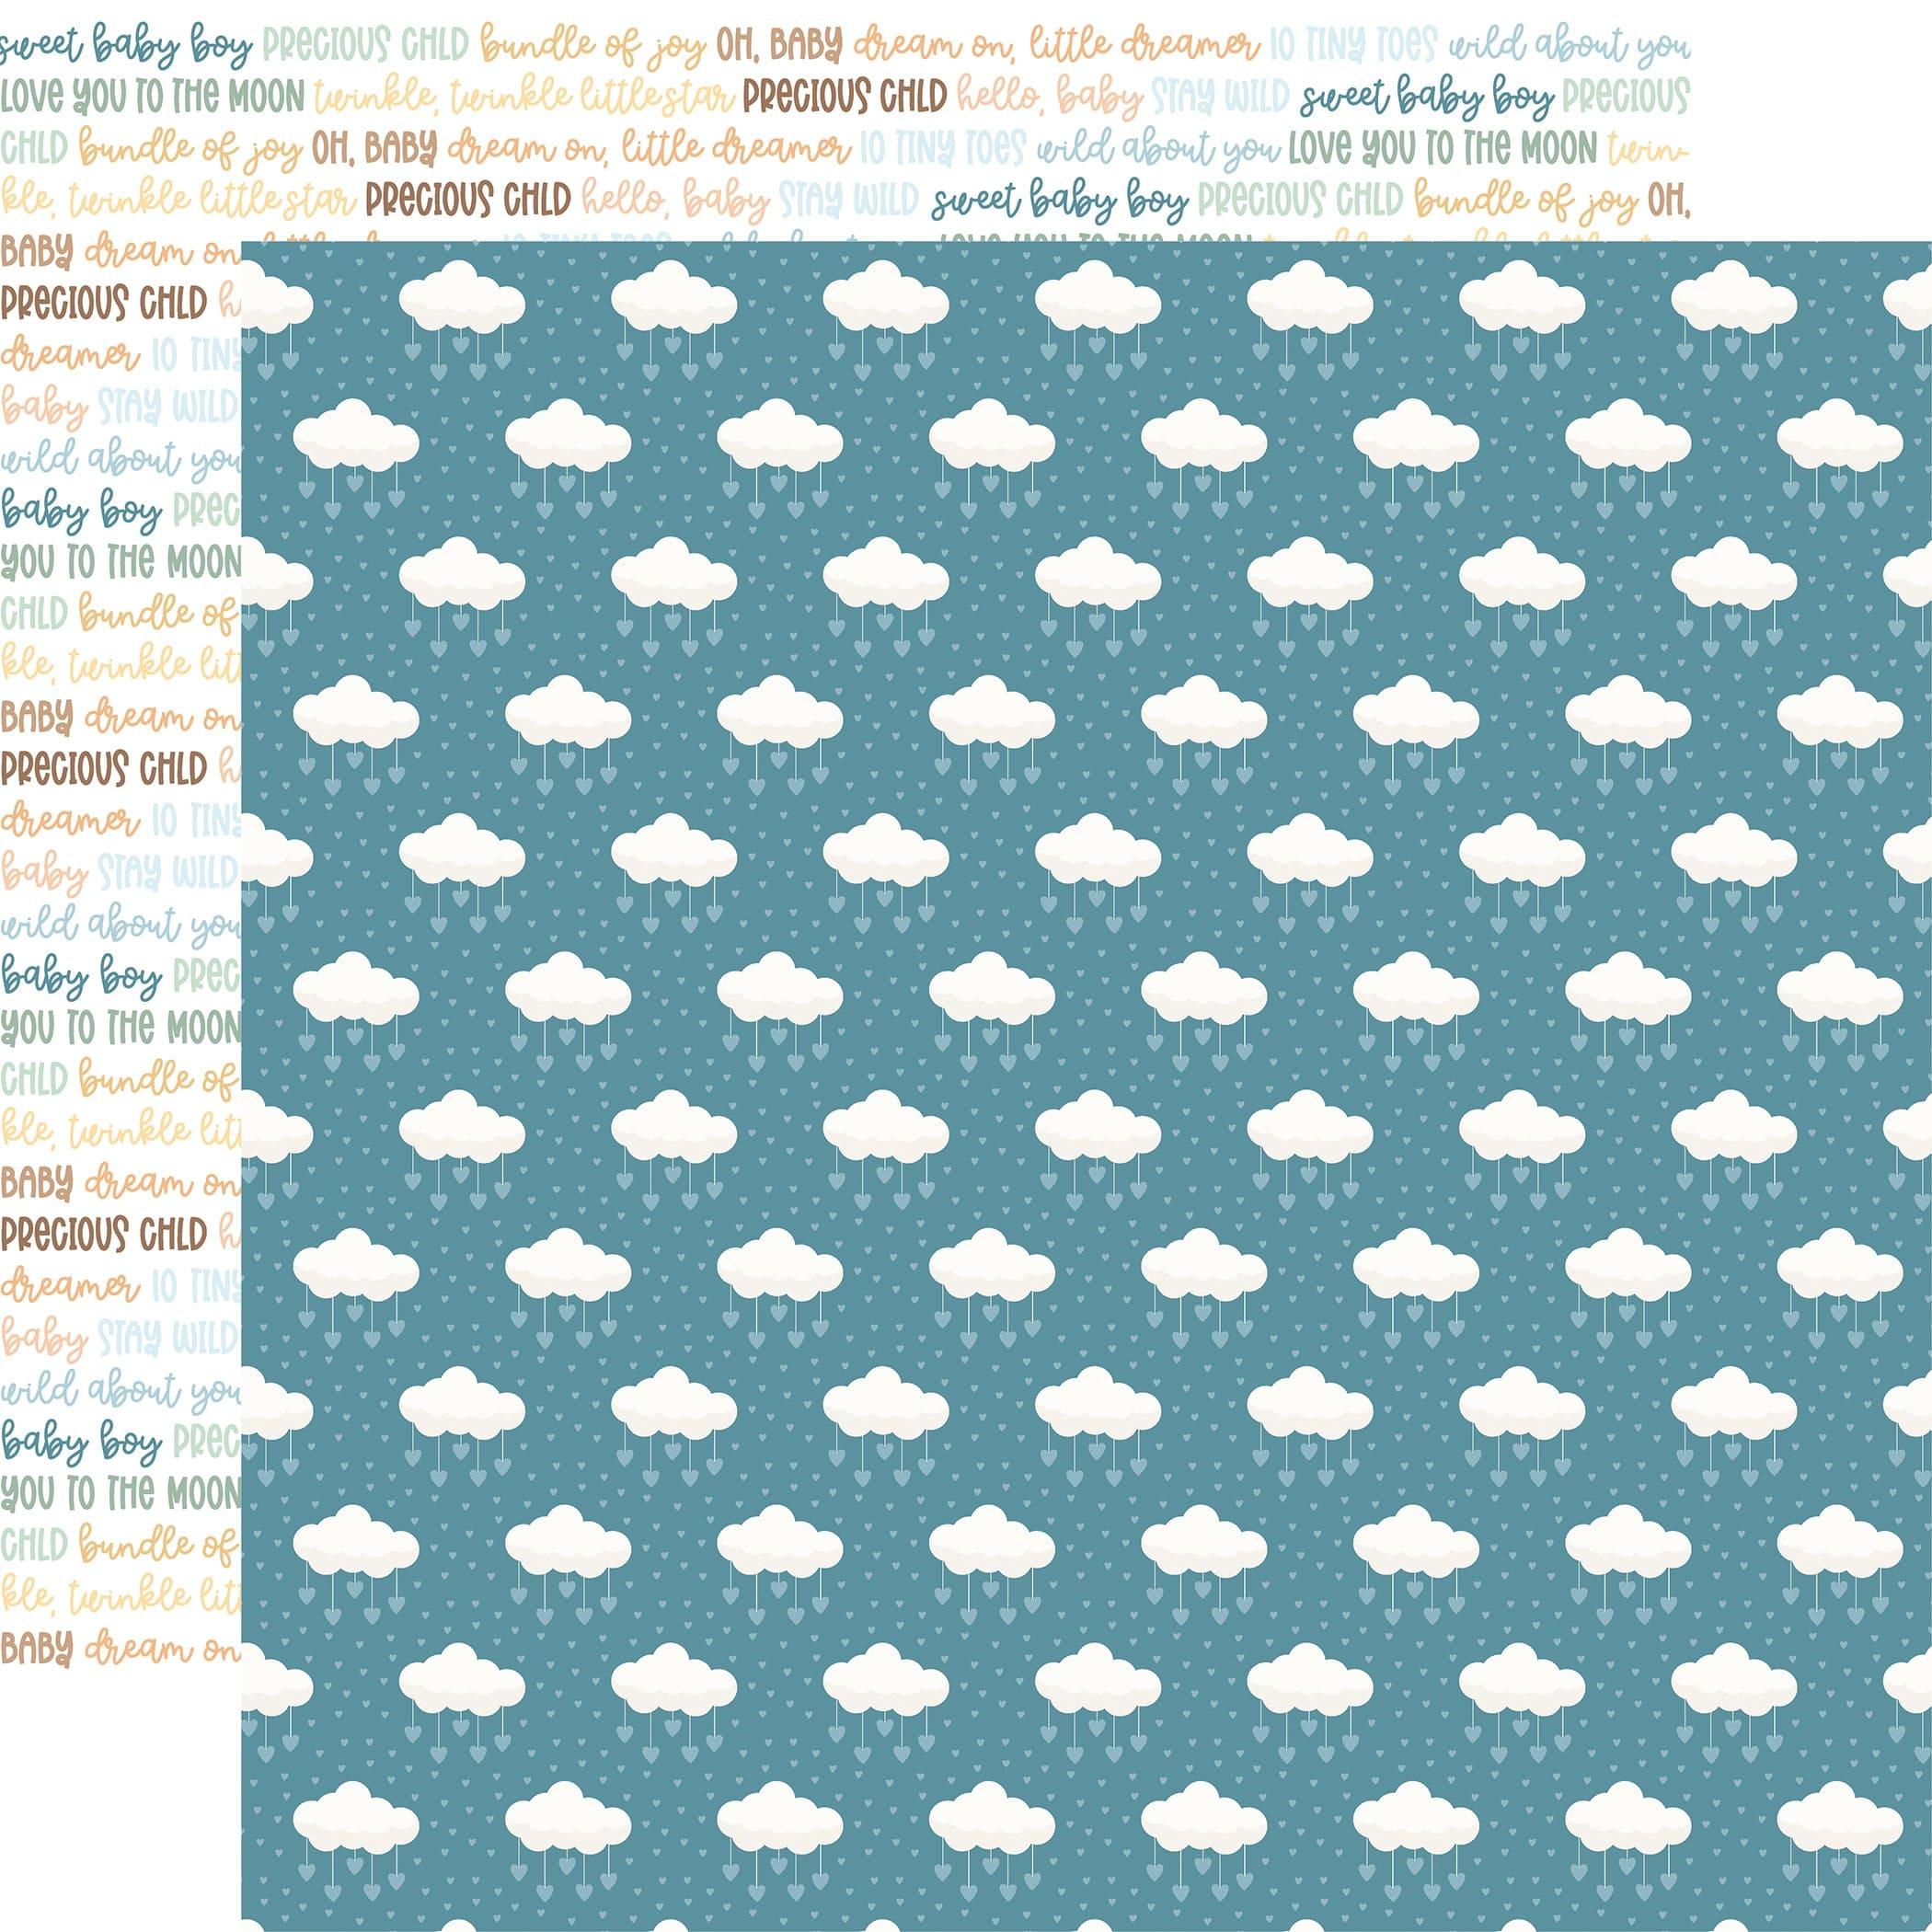 Our Baby Boy Collection Dreamy Clouds 12 x 12 Double-Sided Scrapbook Paper by Echo Park Paper - Scrapbook Supply Companies